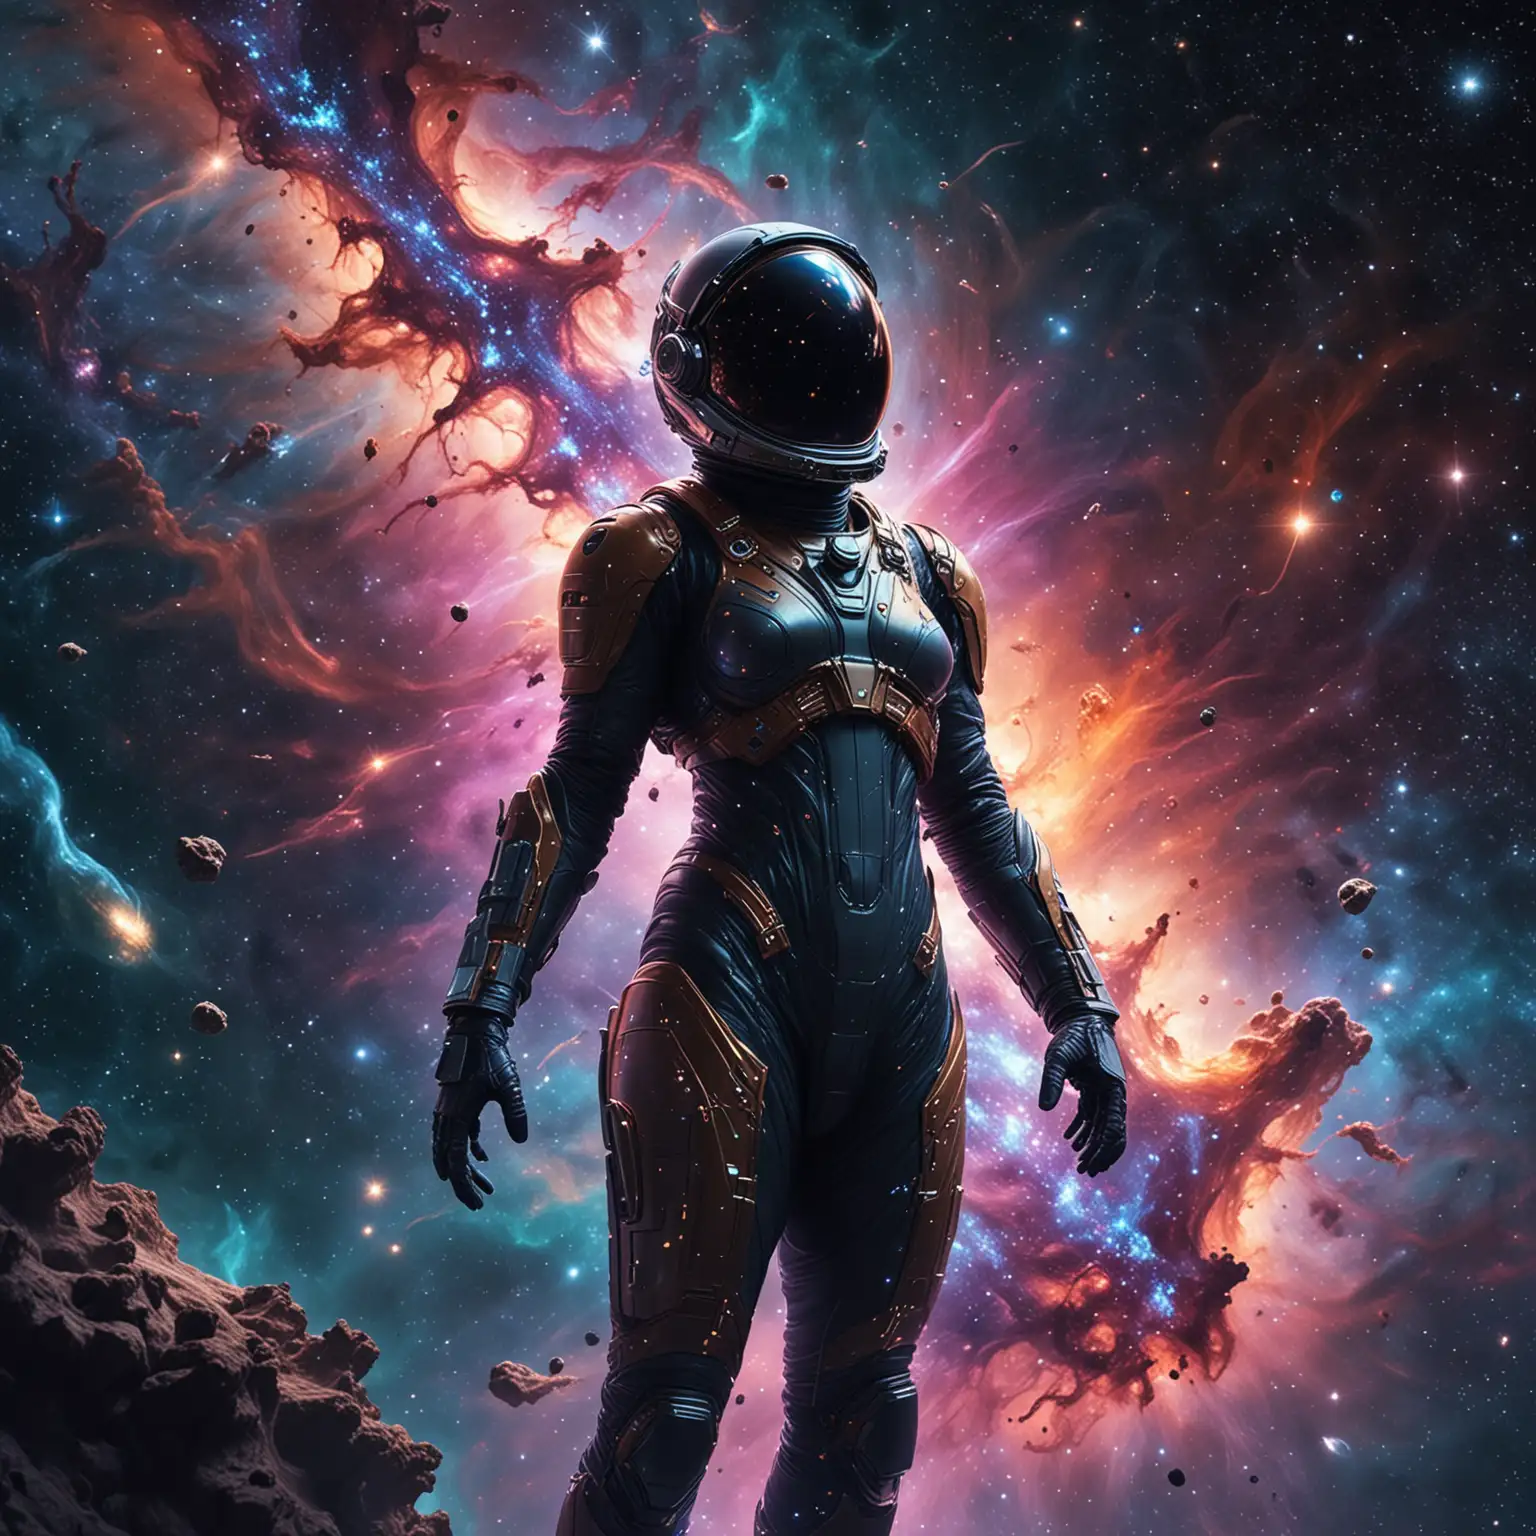 Astronaut Immersed in Cosmic Symphony Vibrant Galaxies and Dark Matter Dance